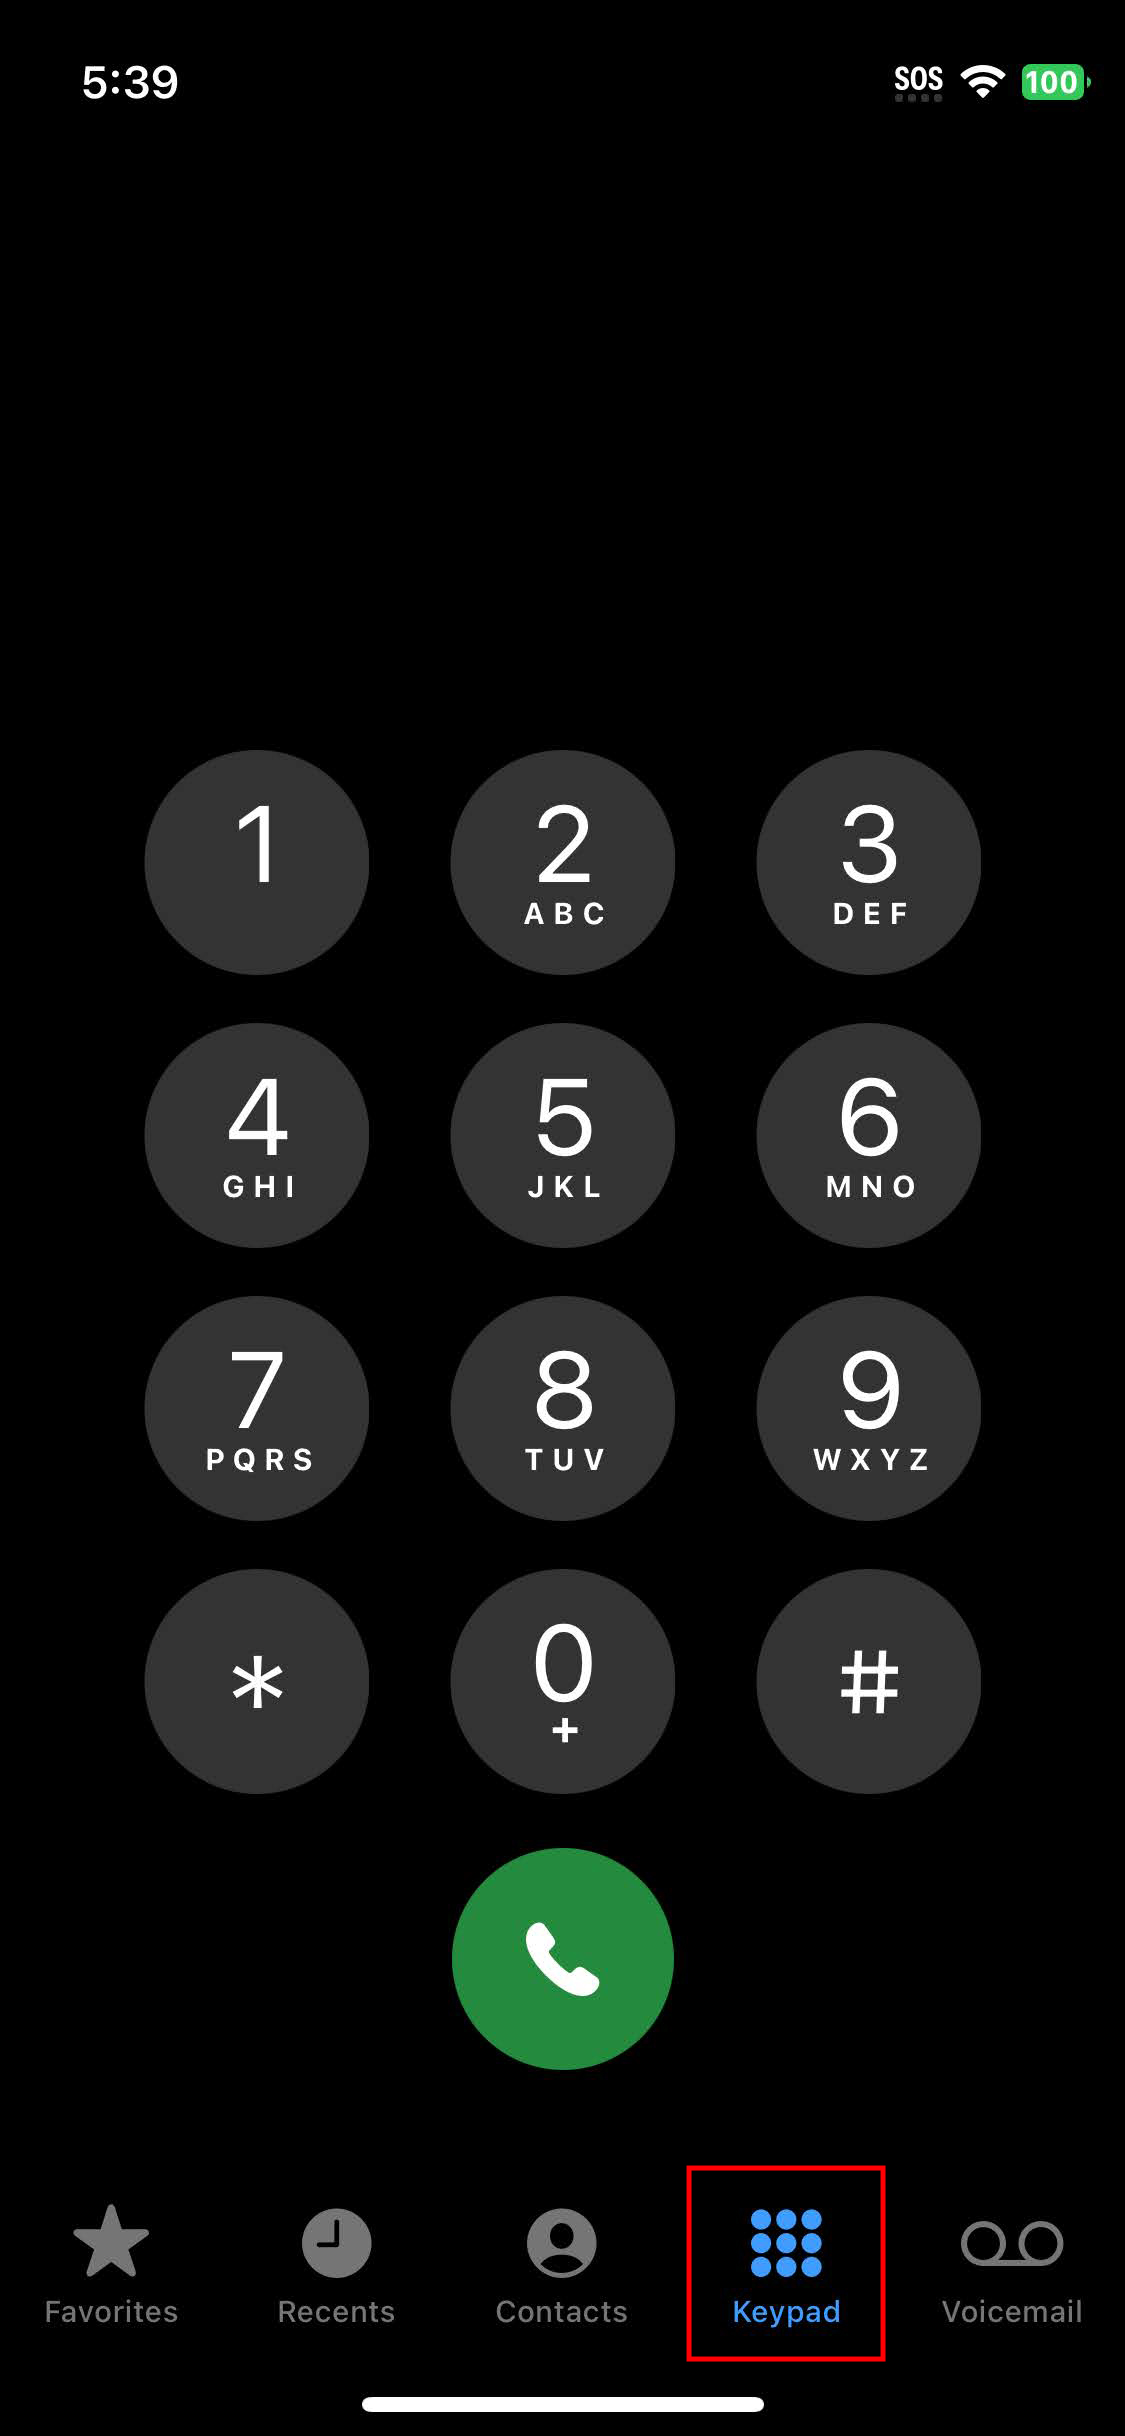 How to use iPhone secret codes (1)